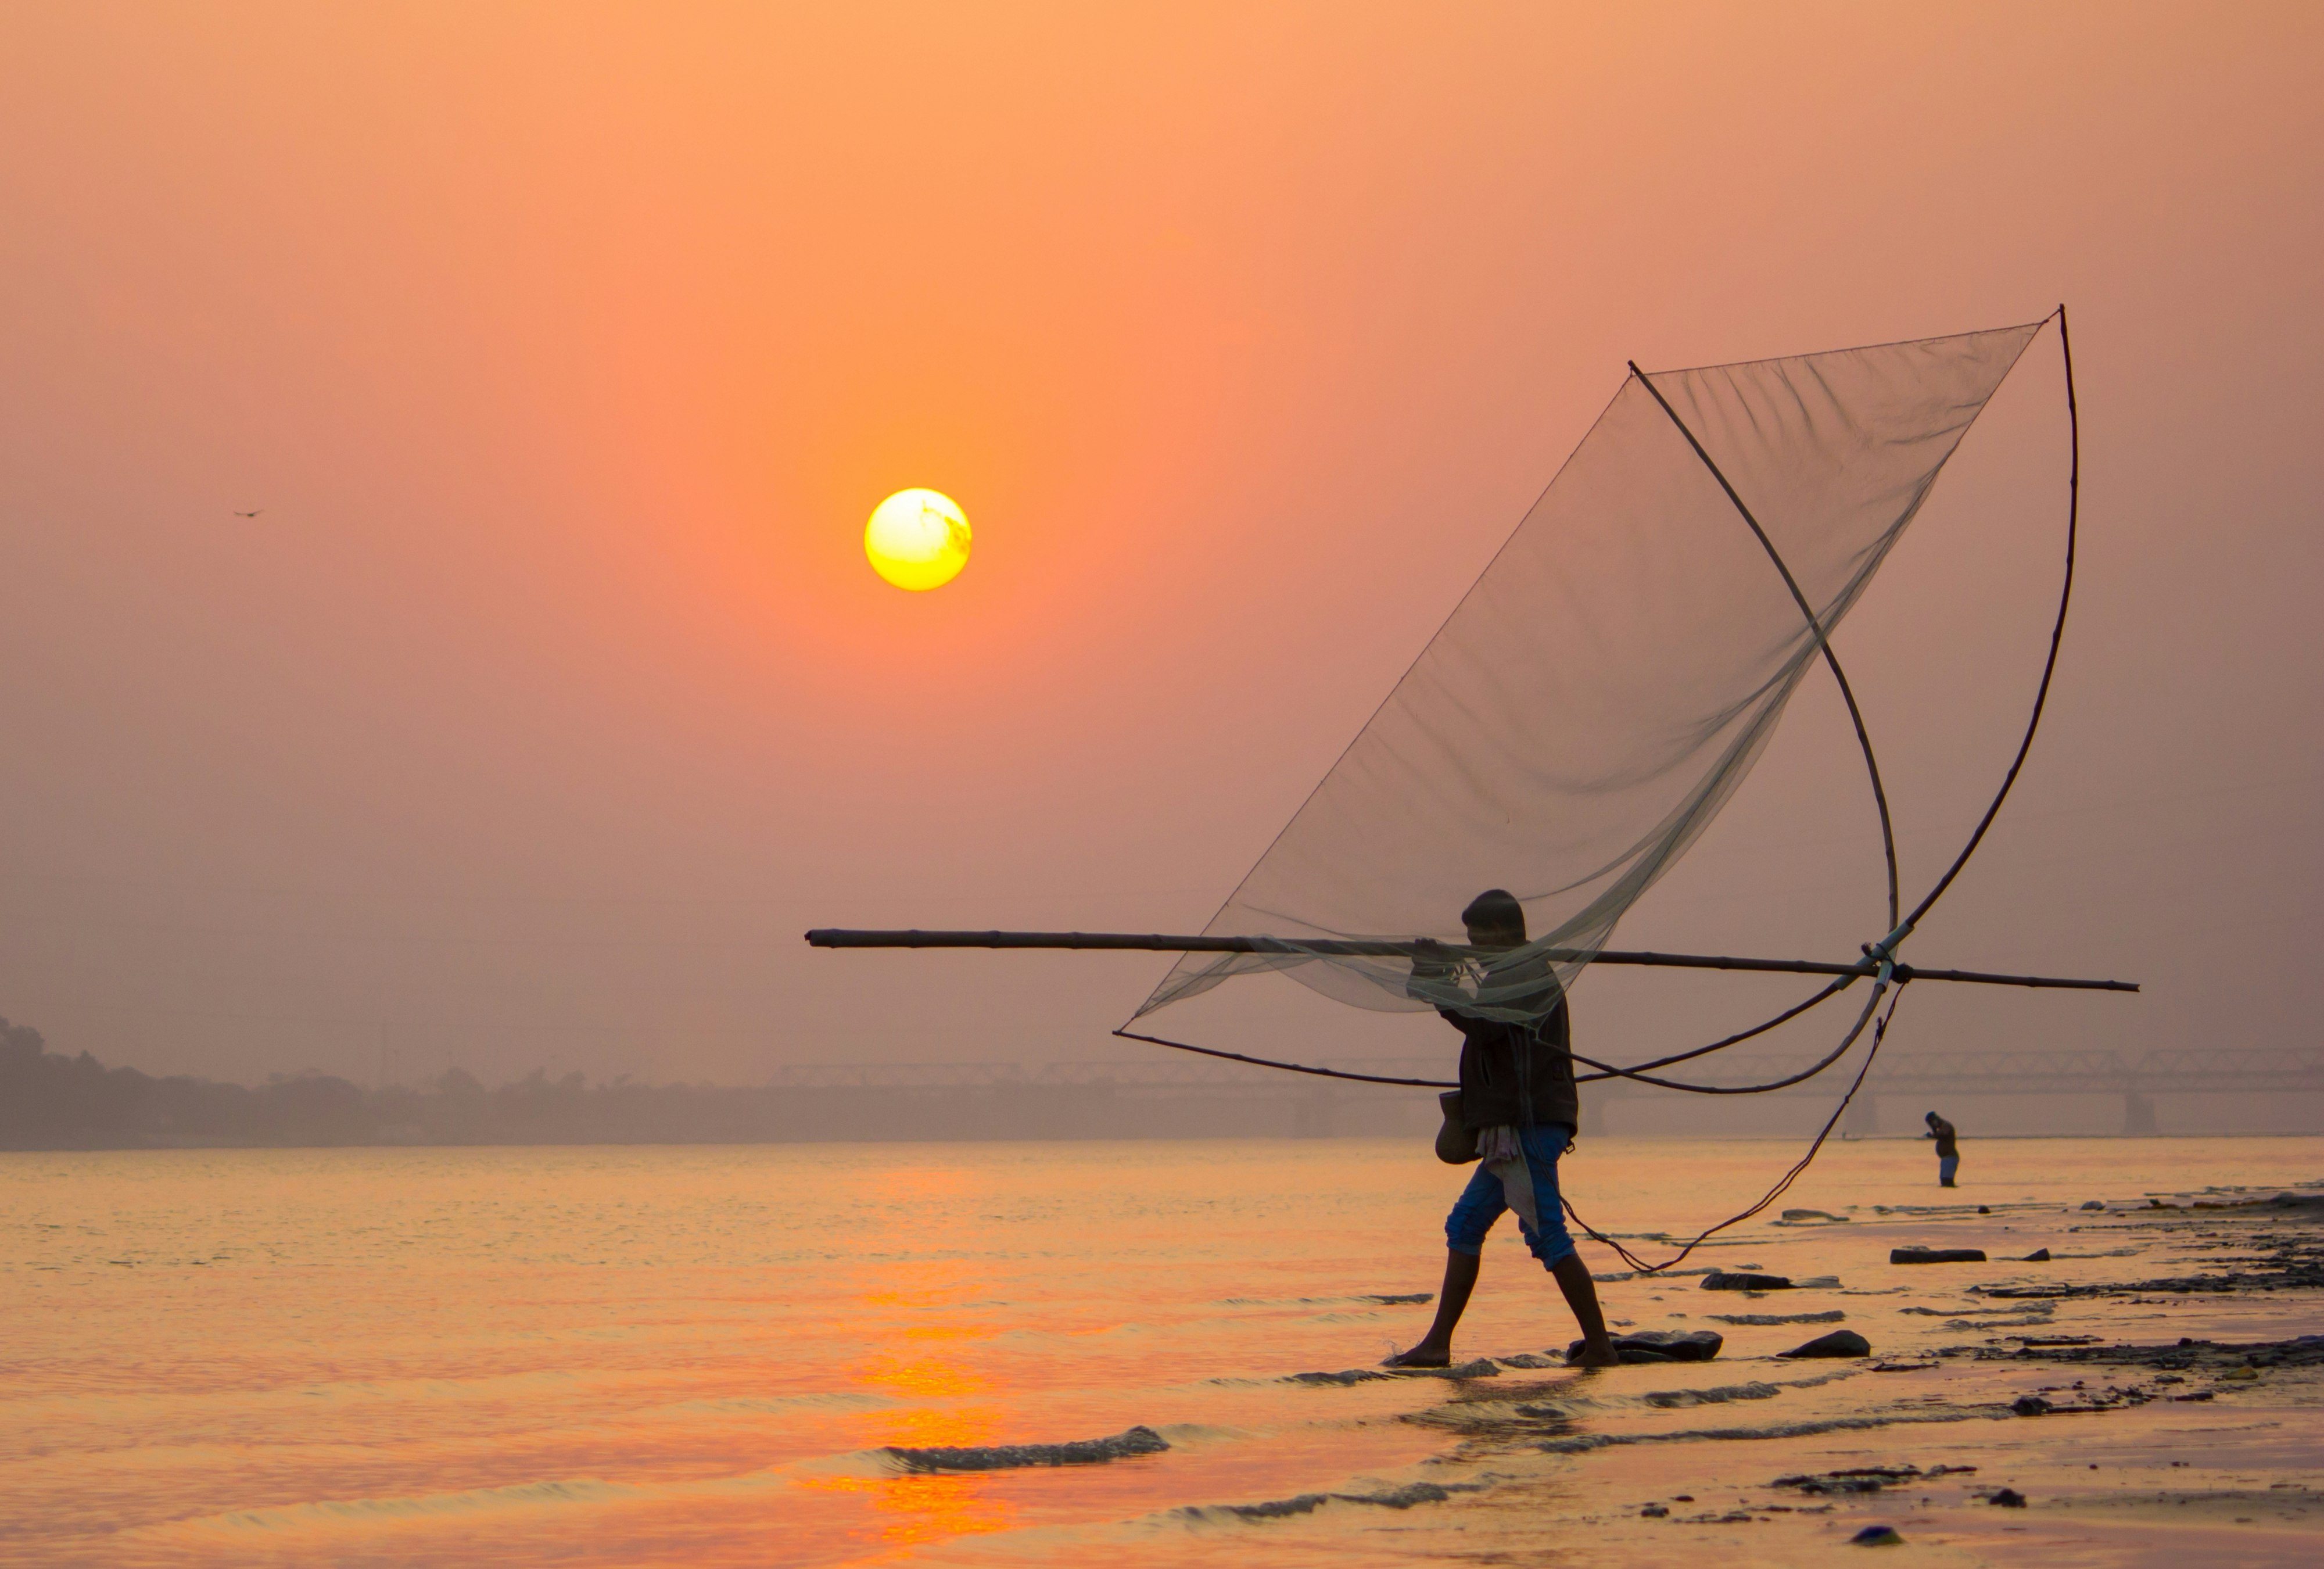 A fisherman, carrying a large net over his shoulder, wades into a river in Assam, with the low sun bathing the scene in an orange hue